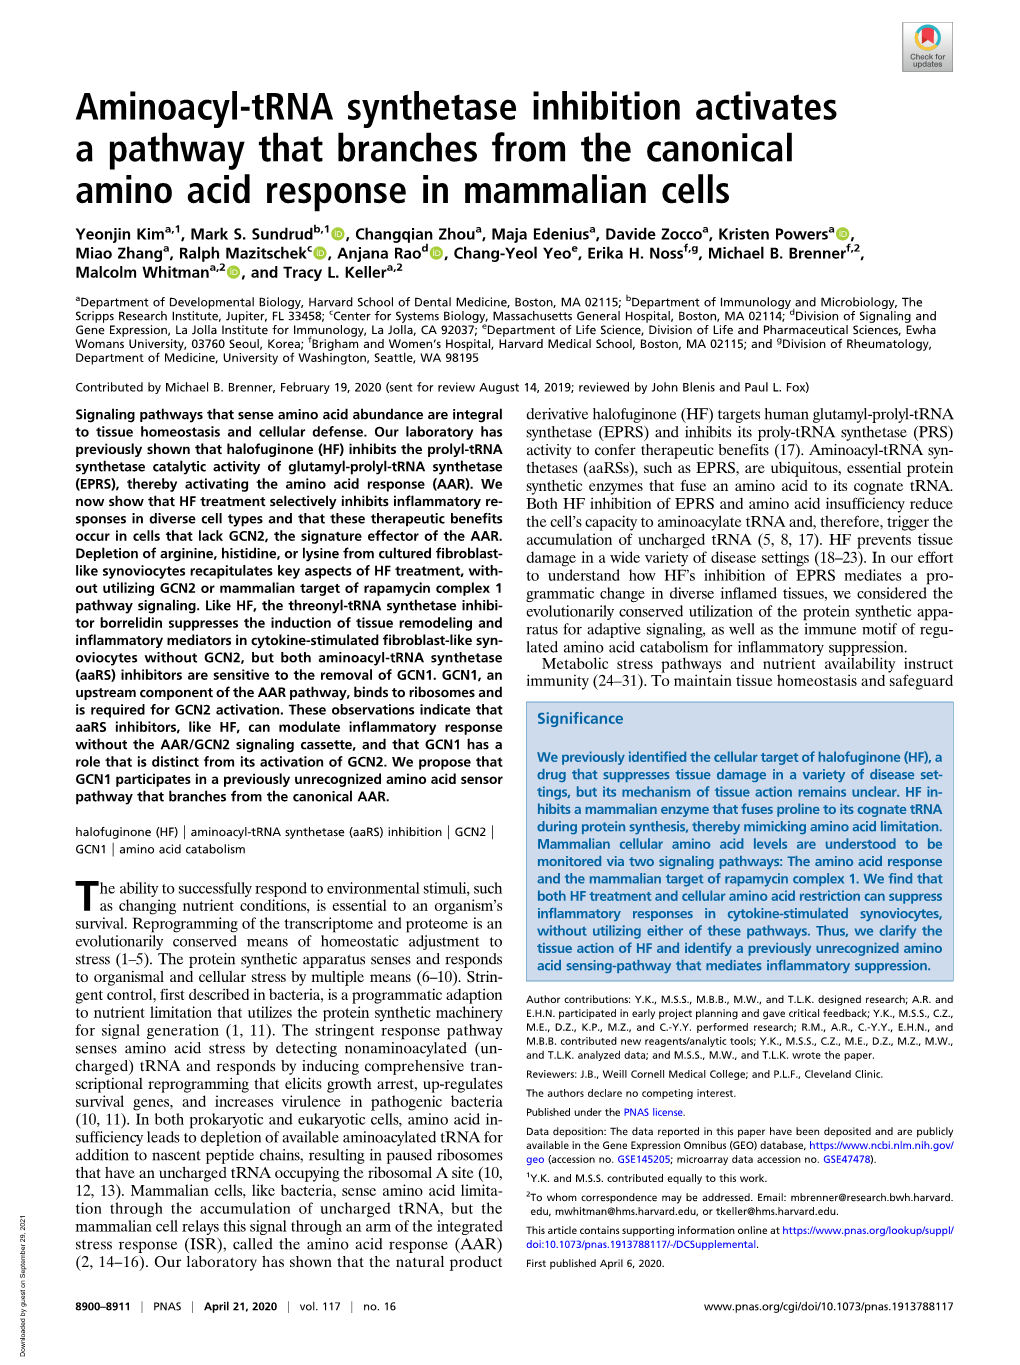 Aminoacyl-Trna Synthetase Inhibition Activates a Pathway That Branches from the Canonical Amino Acid Response in Mammalian Cells